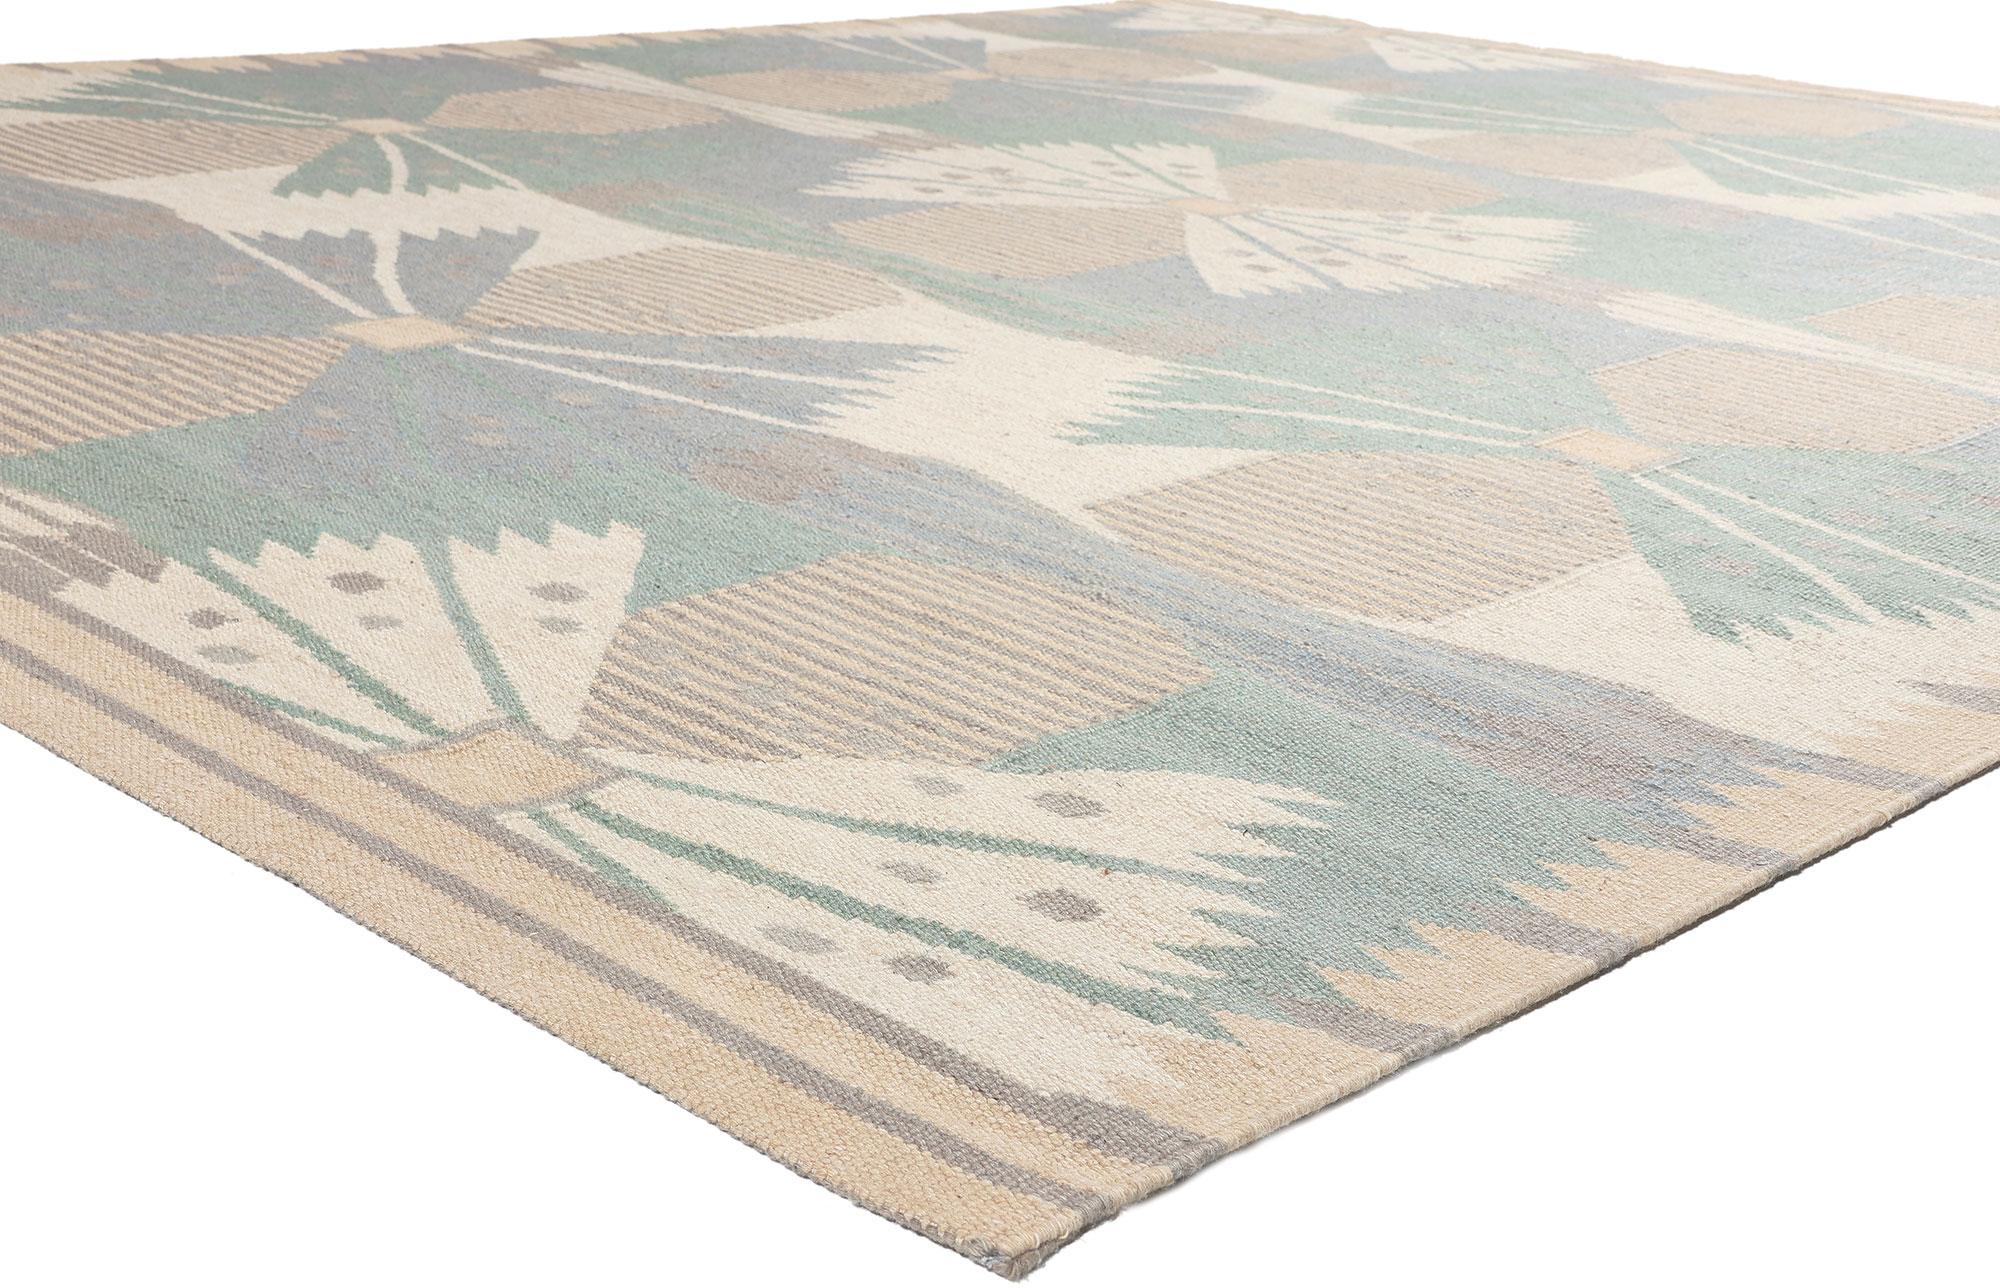 30978 Scandinavian Modern Swedish Inspired Kilim Rug, 09'05 x 11'07.
With its simplicity, geometric design and soft colors, this hand-woven wool Swedish inspired Kilim rug provides a feeling of cozy contentment without the clutter. Reflecting